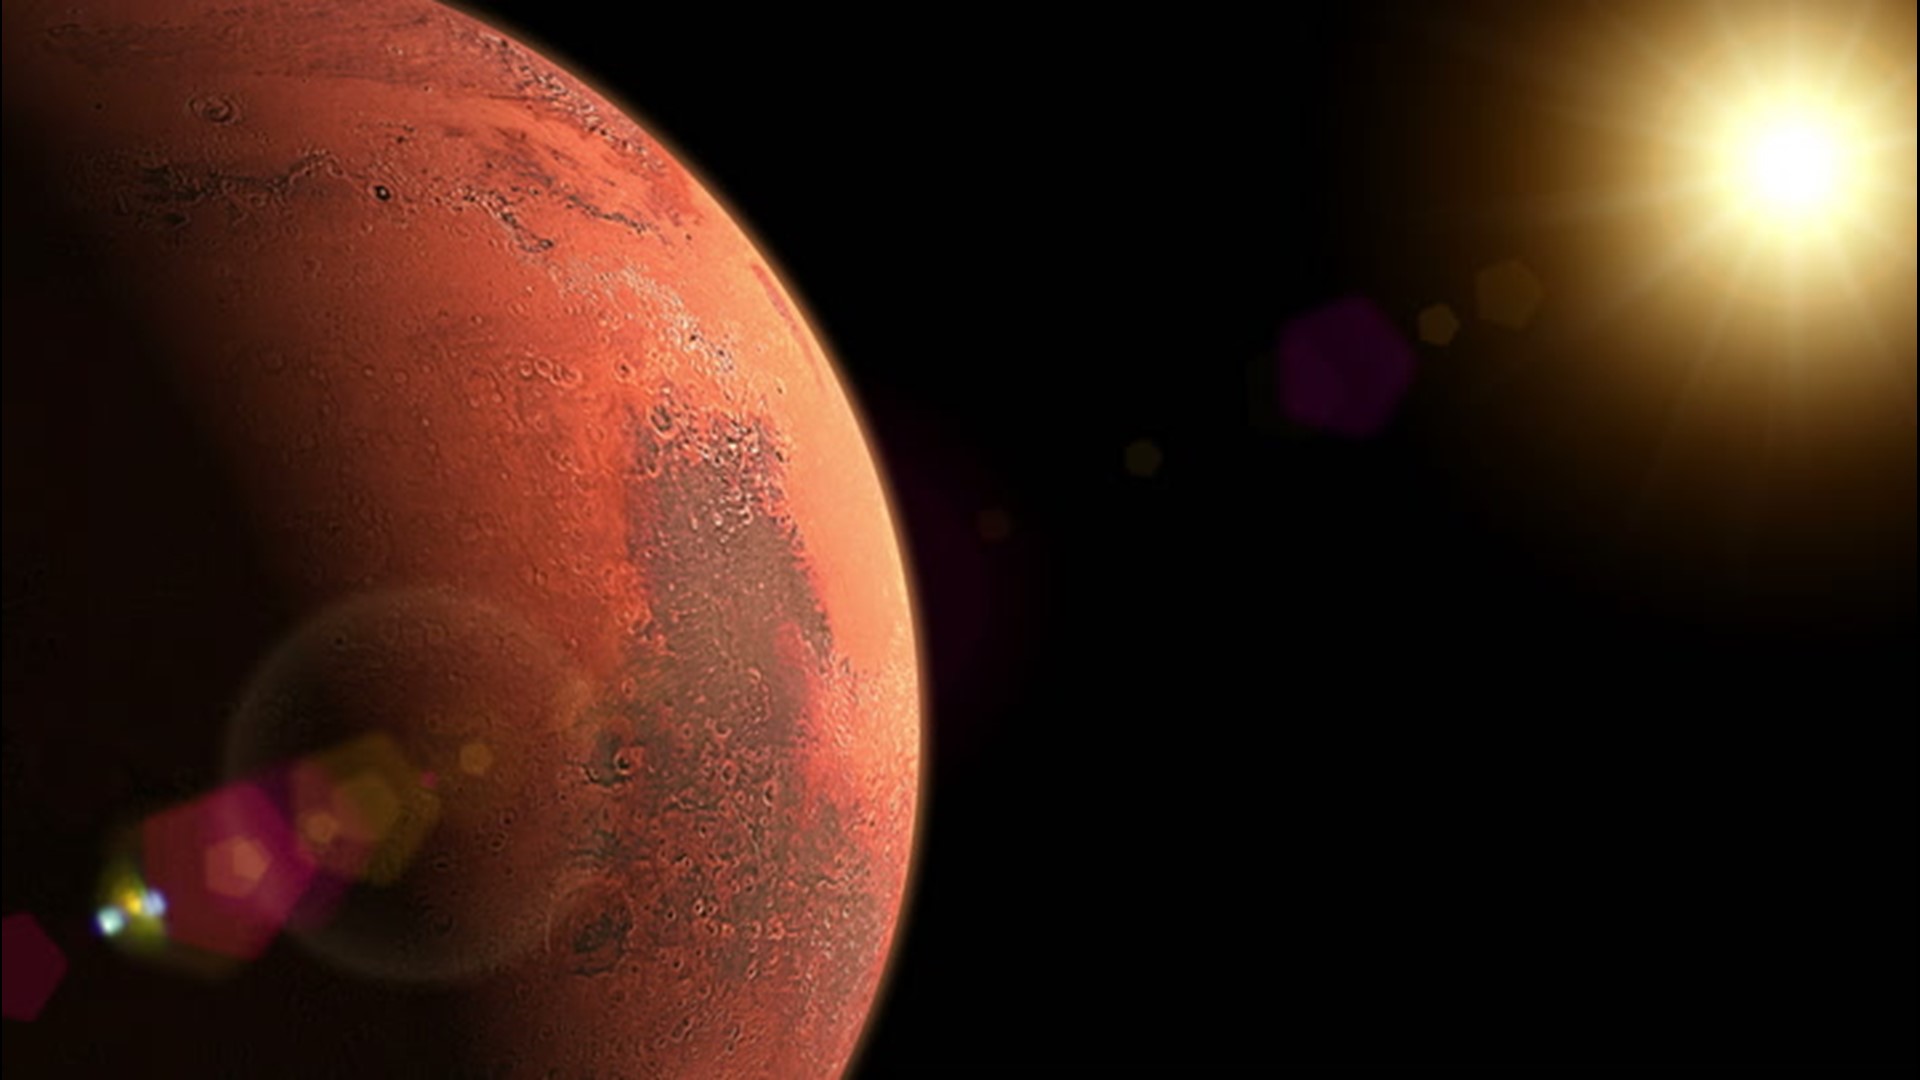 Like Earth, Mars has an atmosphere giving the Red Planet its own weather system. Here's a look at some of the most prominent features of Martian weather.